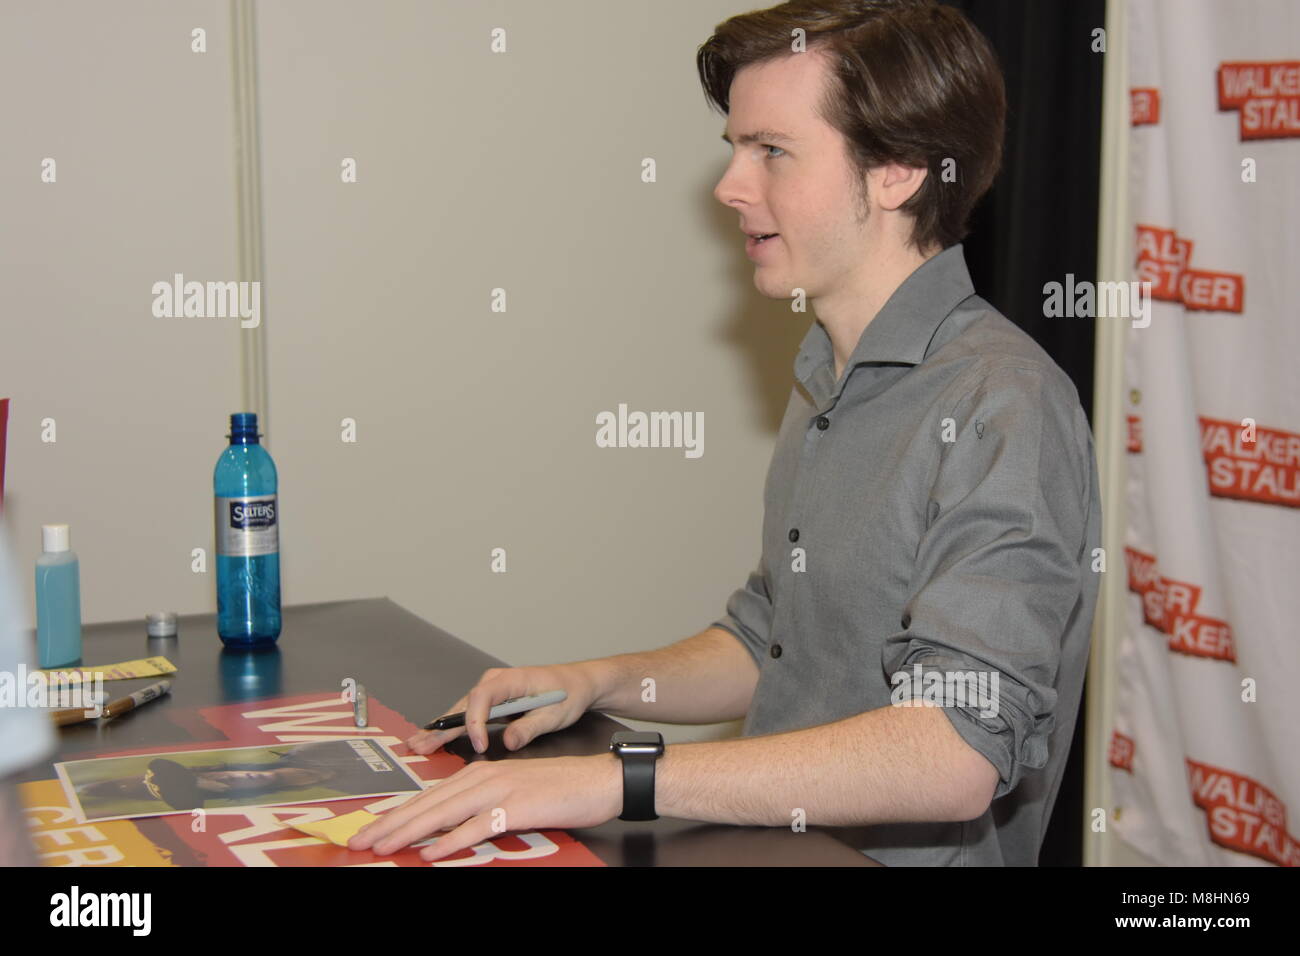 MANNHEIM, GERMANY - MARCH 17: Actor Chandler Riggs (Carl on The Walking Dead) at the Walker Stalker Germany convention. (Photo by Markus Wissmann) Stock Photo